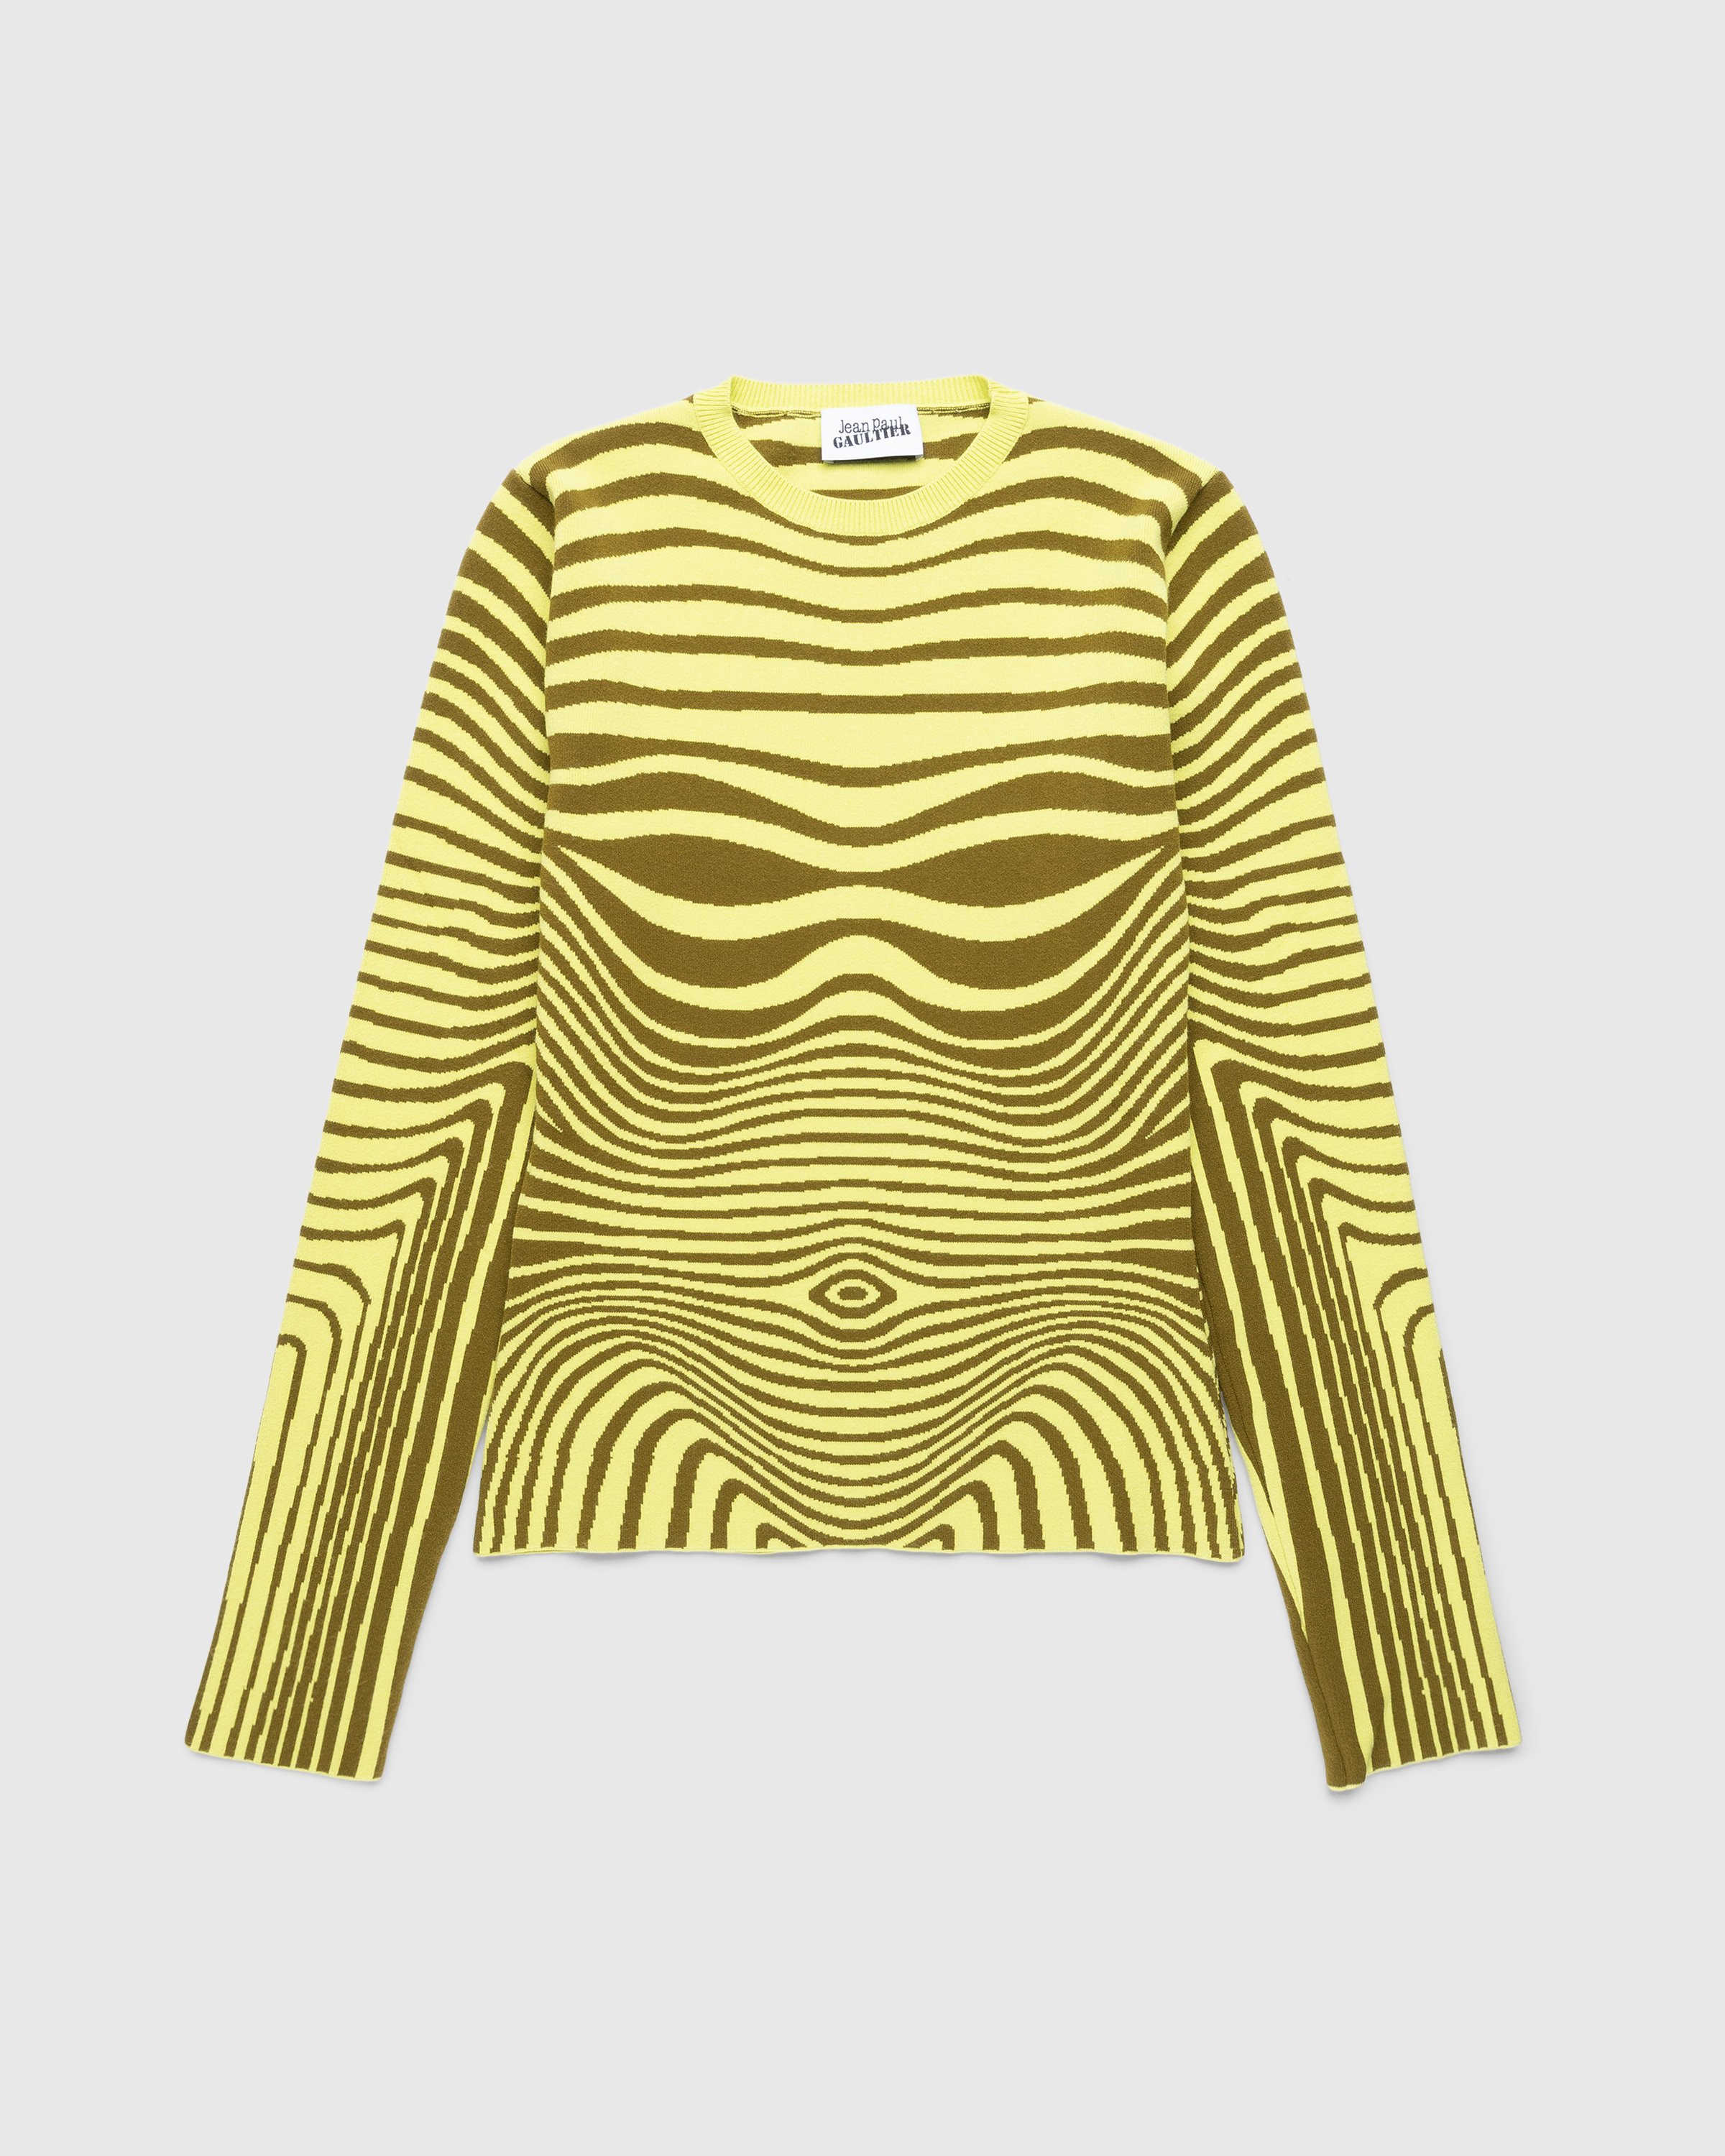 Jean Paul Gaultier - Long Sleeves Crew Neck Morphing Stripes Green - Clothing - Green - Image 1